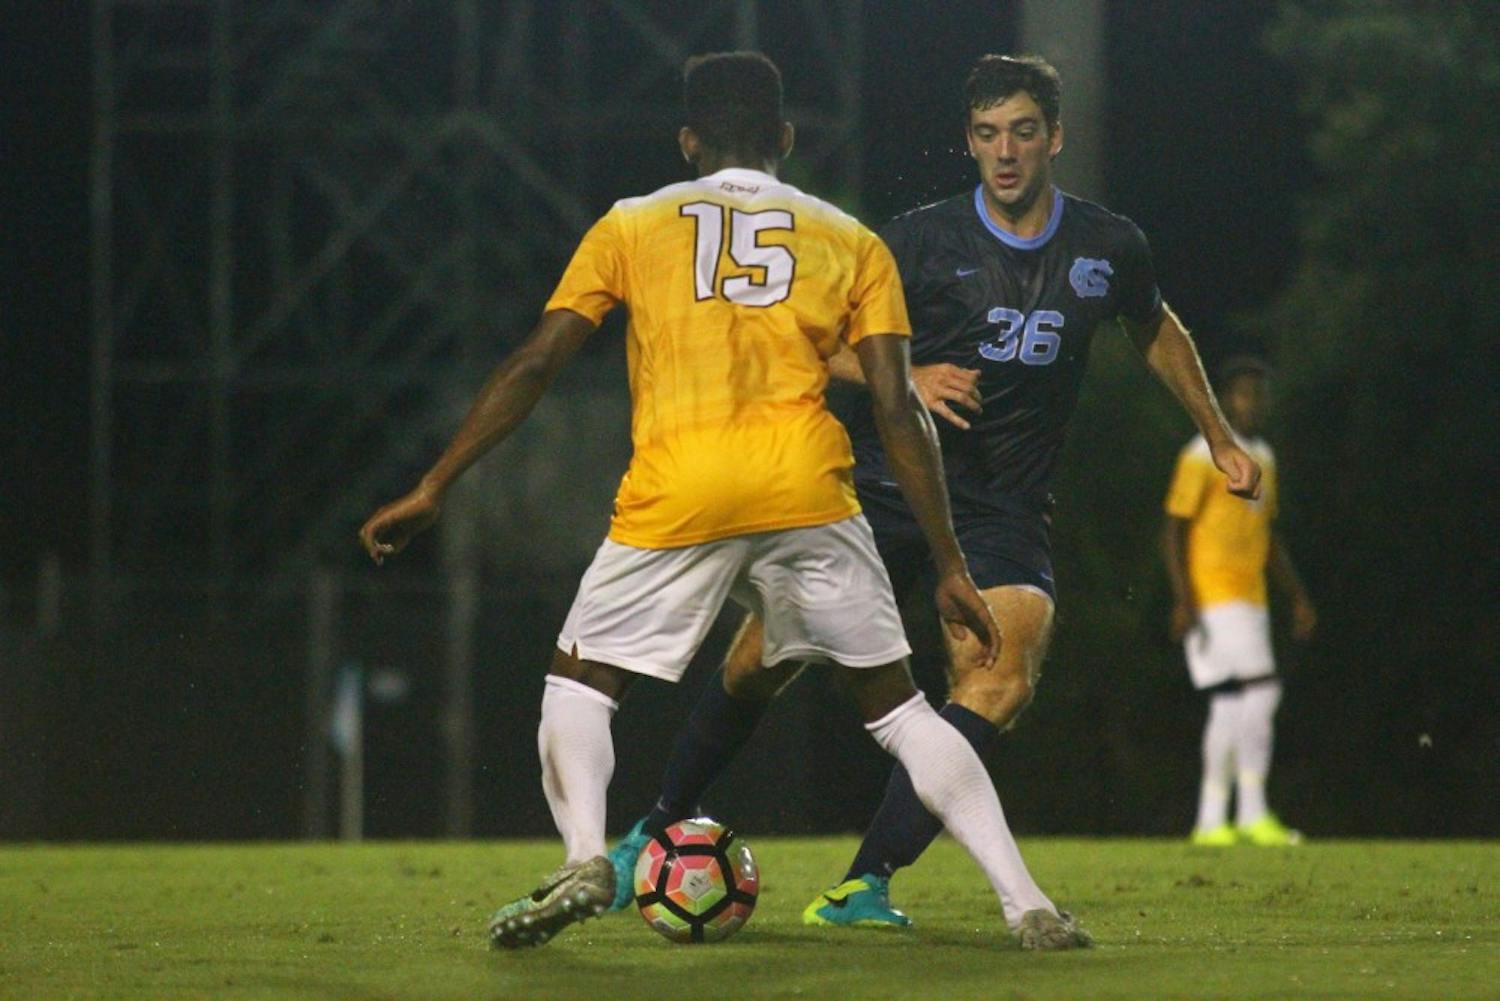 UNC forward Tucker Hume (36) dribbles past VCU defender RJ Roberts (15)&nbsp;on Monday night. Hume scored the game-winning shot in the final 10 minutes&nbsp;to lift the Tar Heels to a 3-2 victory.